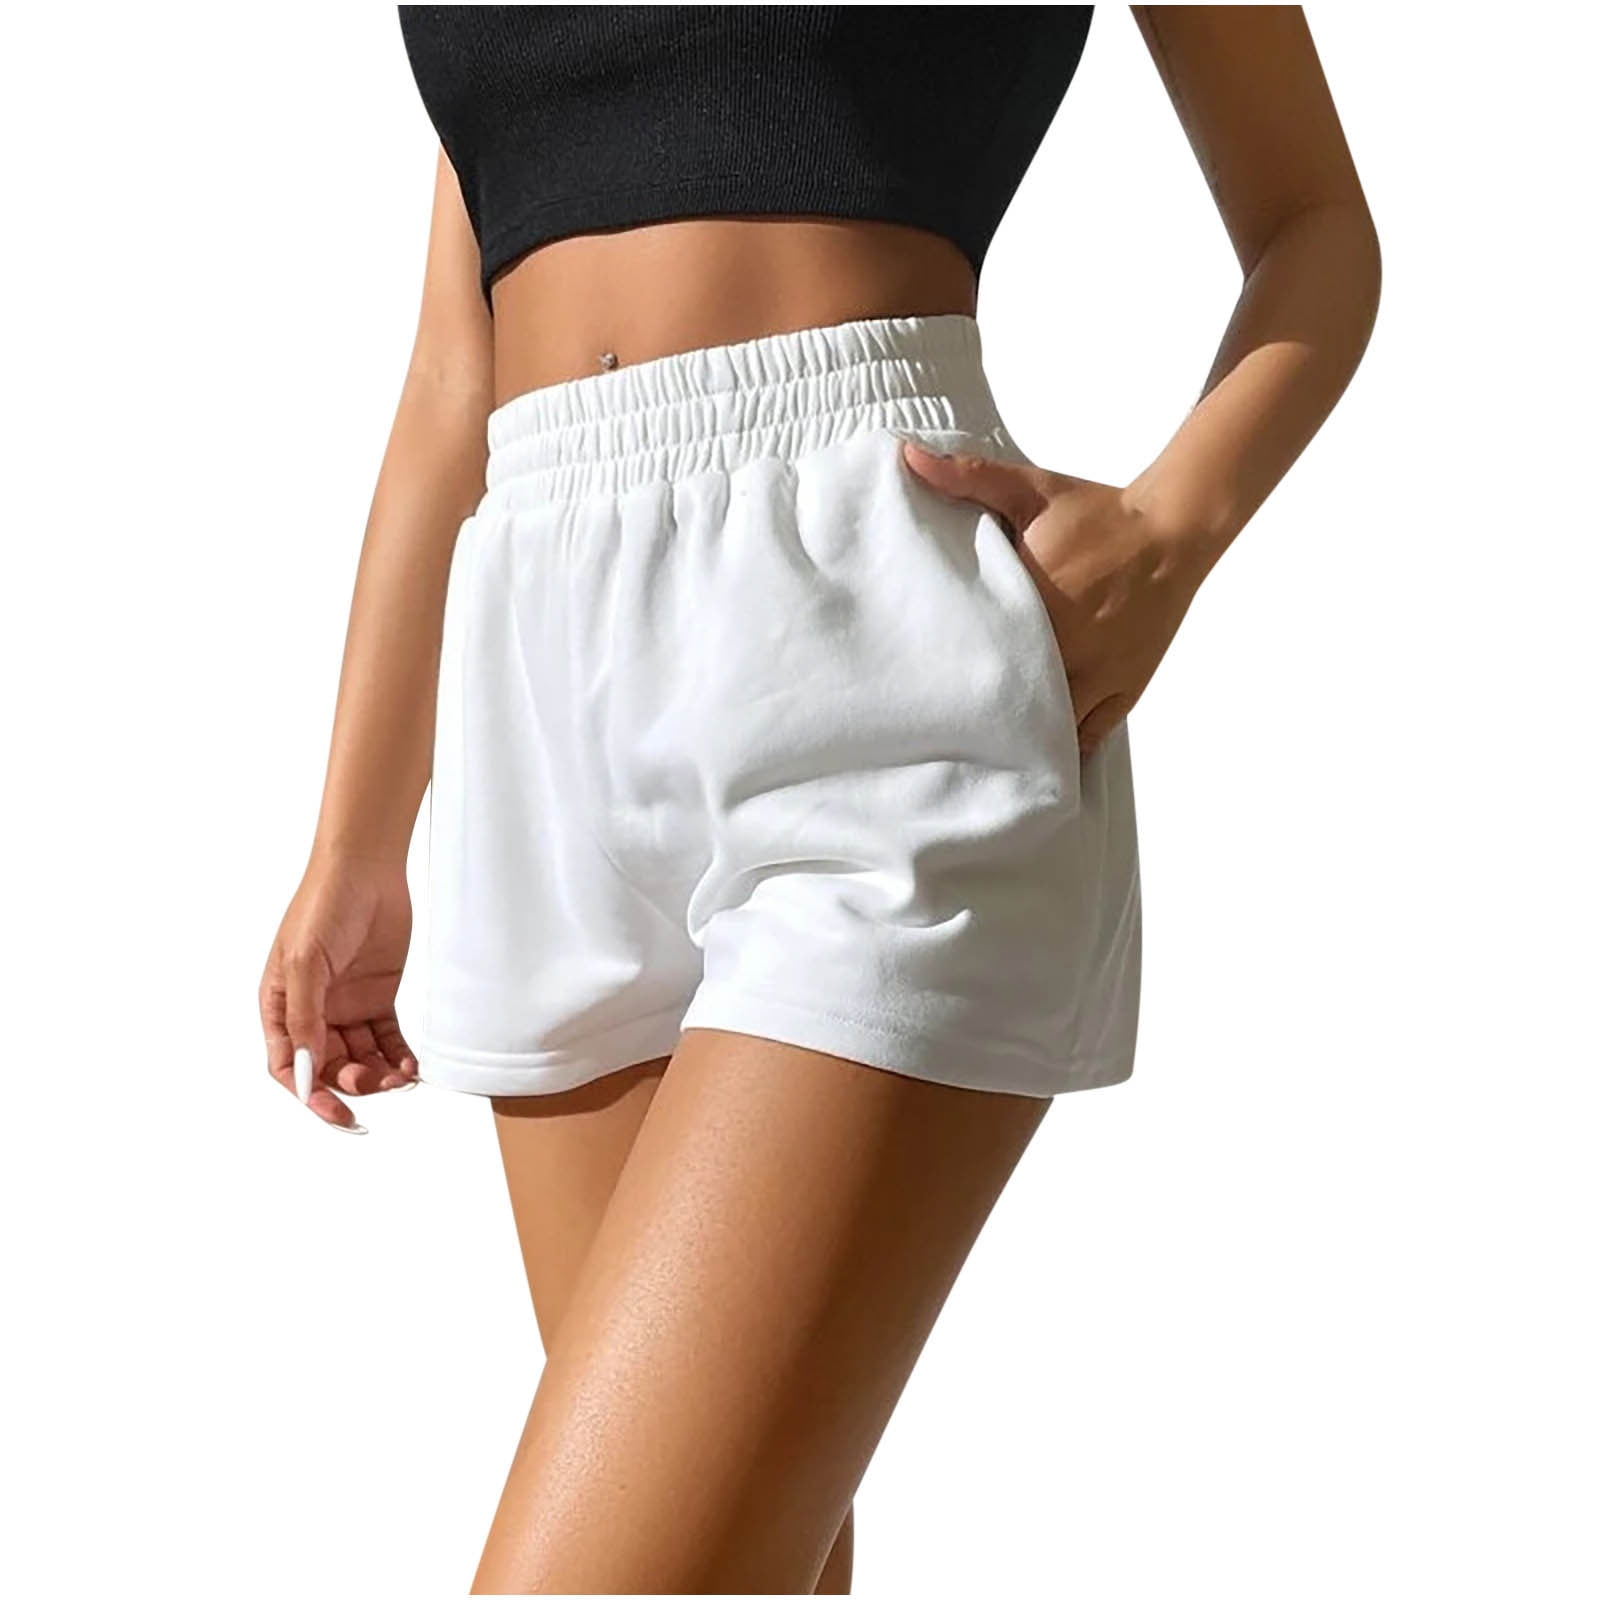 Sweat Shorts for Women Elastic High Waisted Cotton Shorts Casual